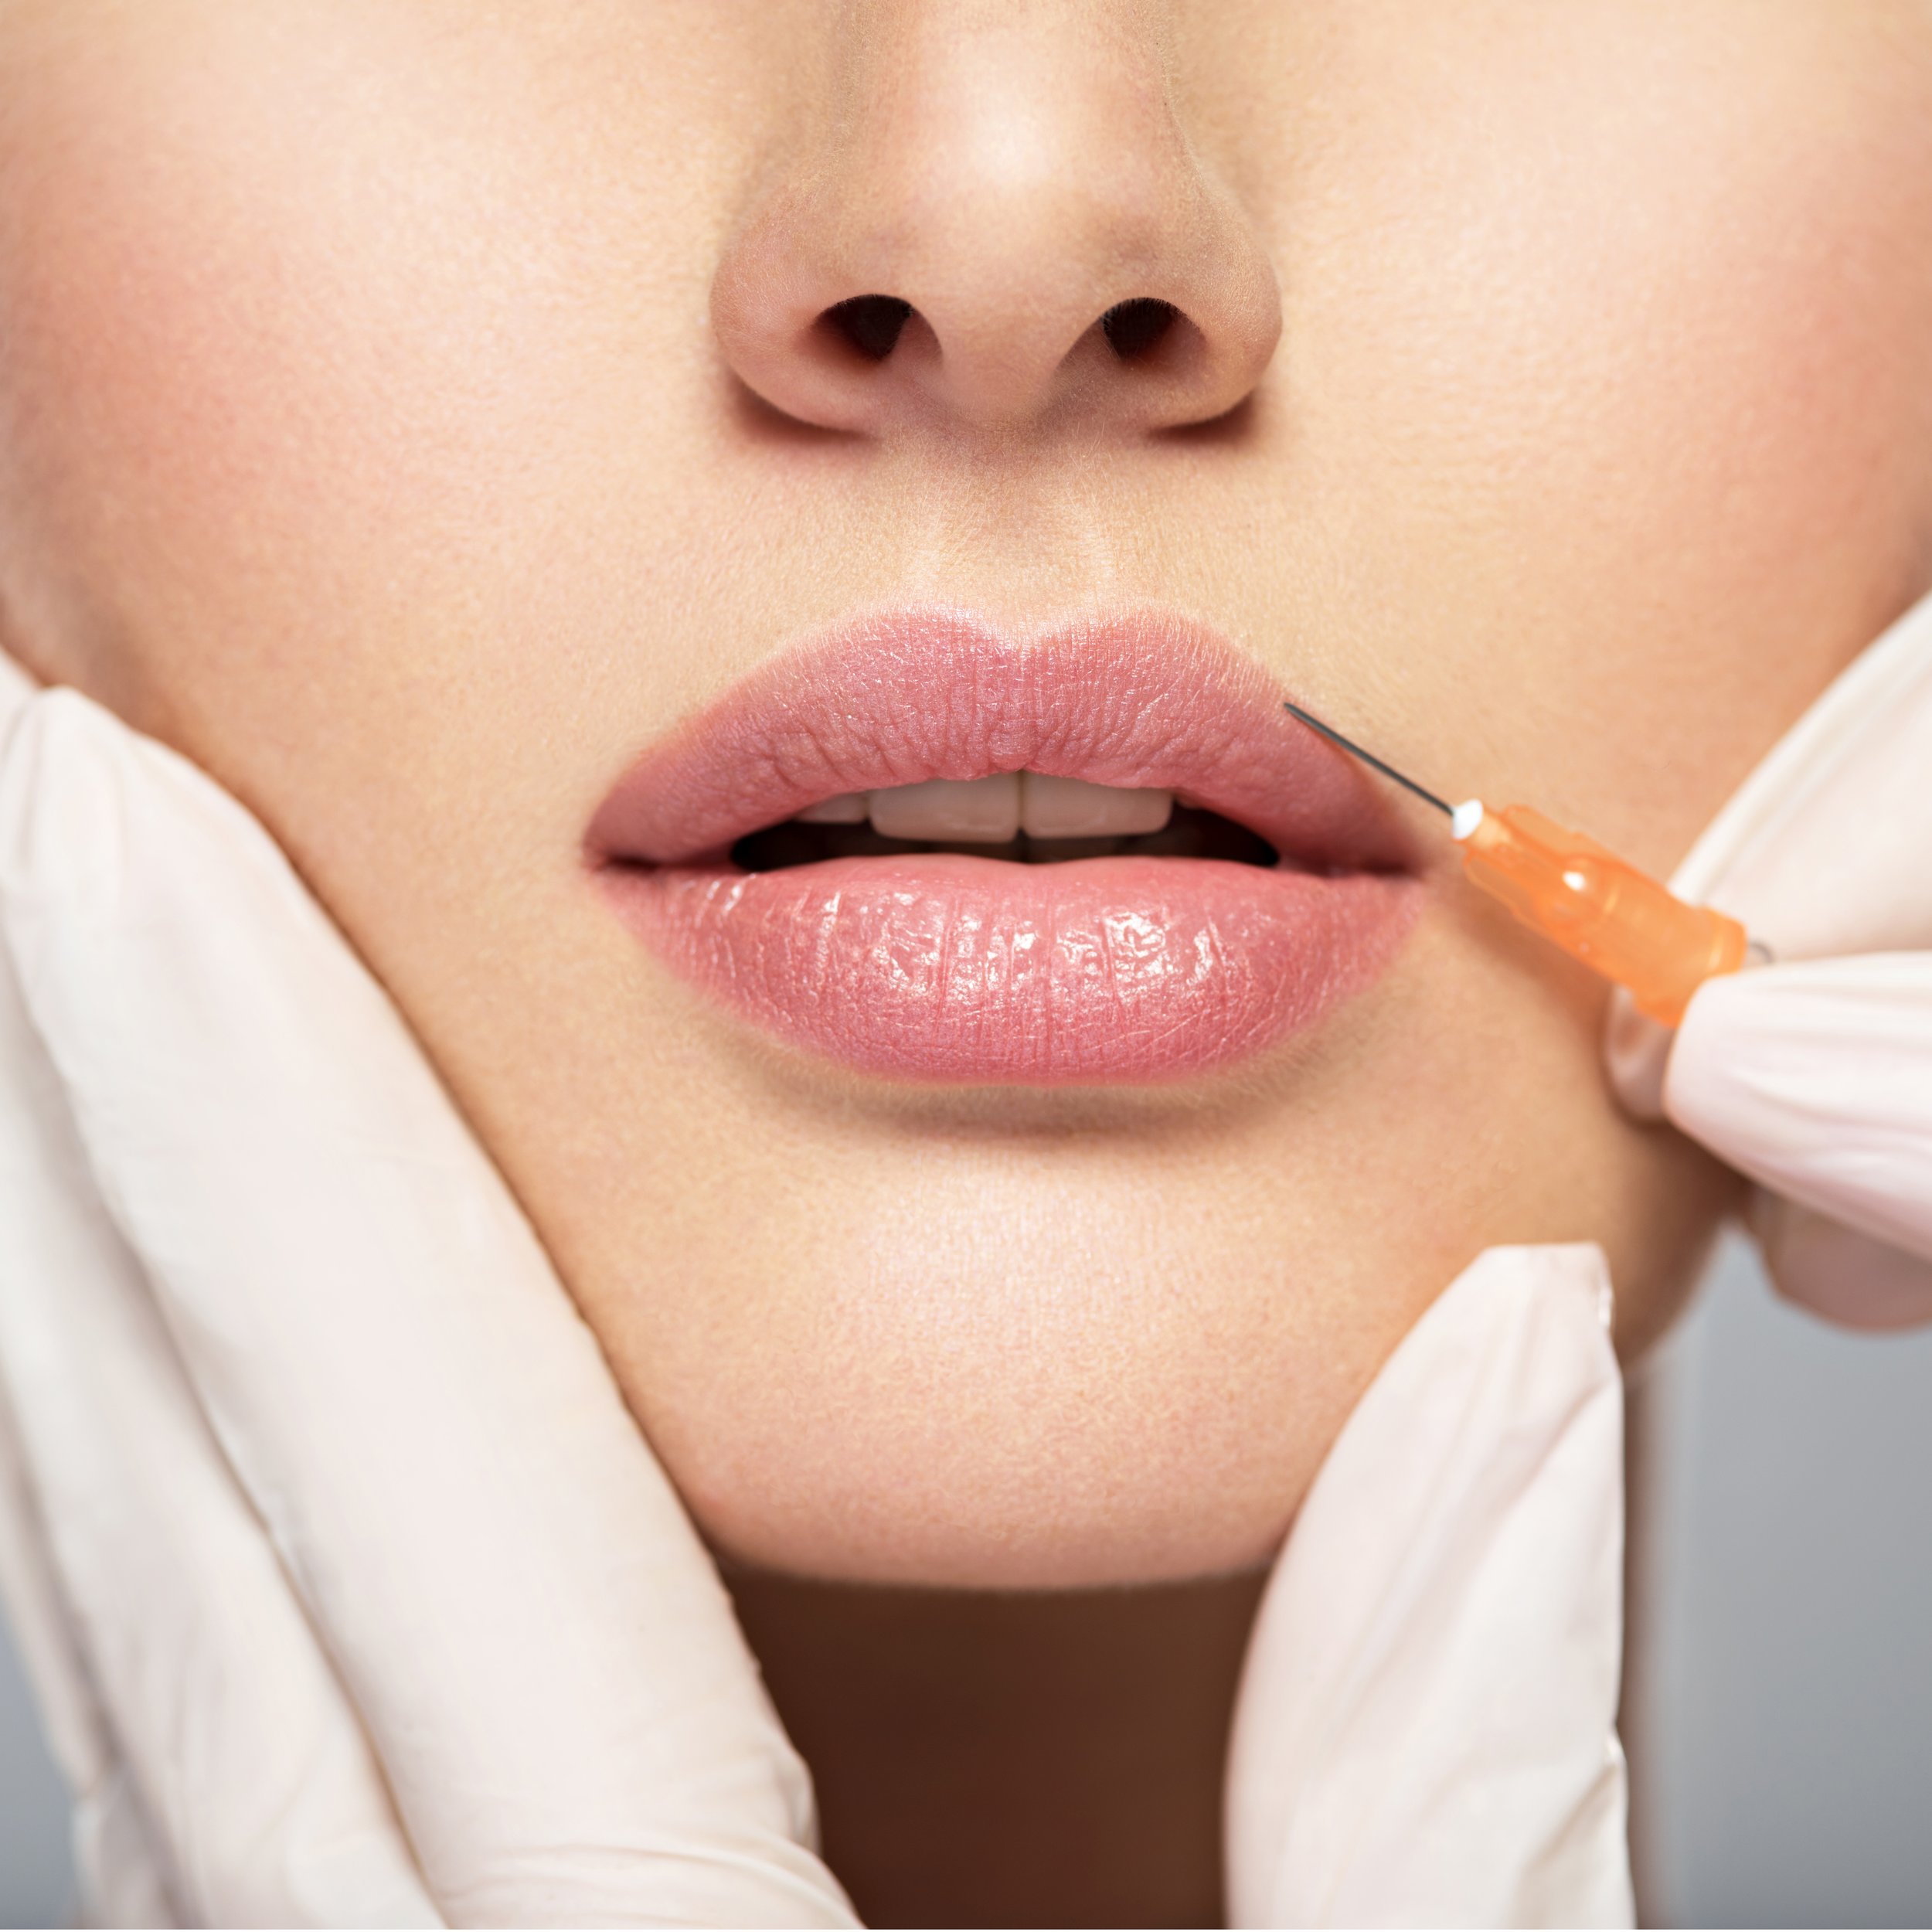 Injectables image.jpg